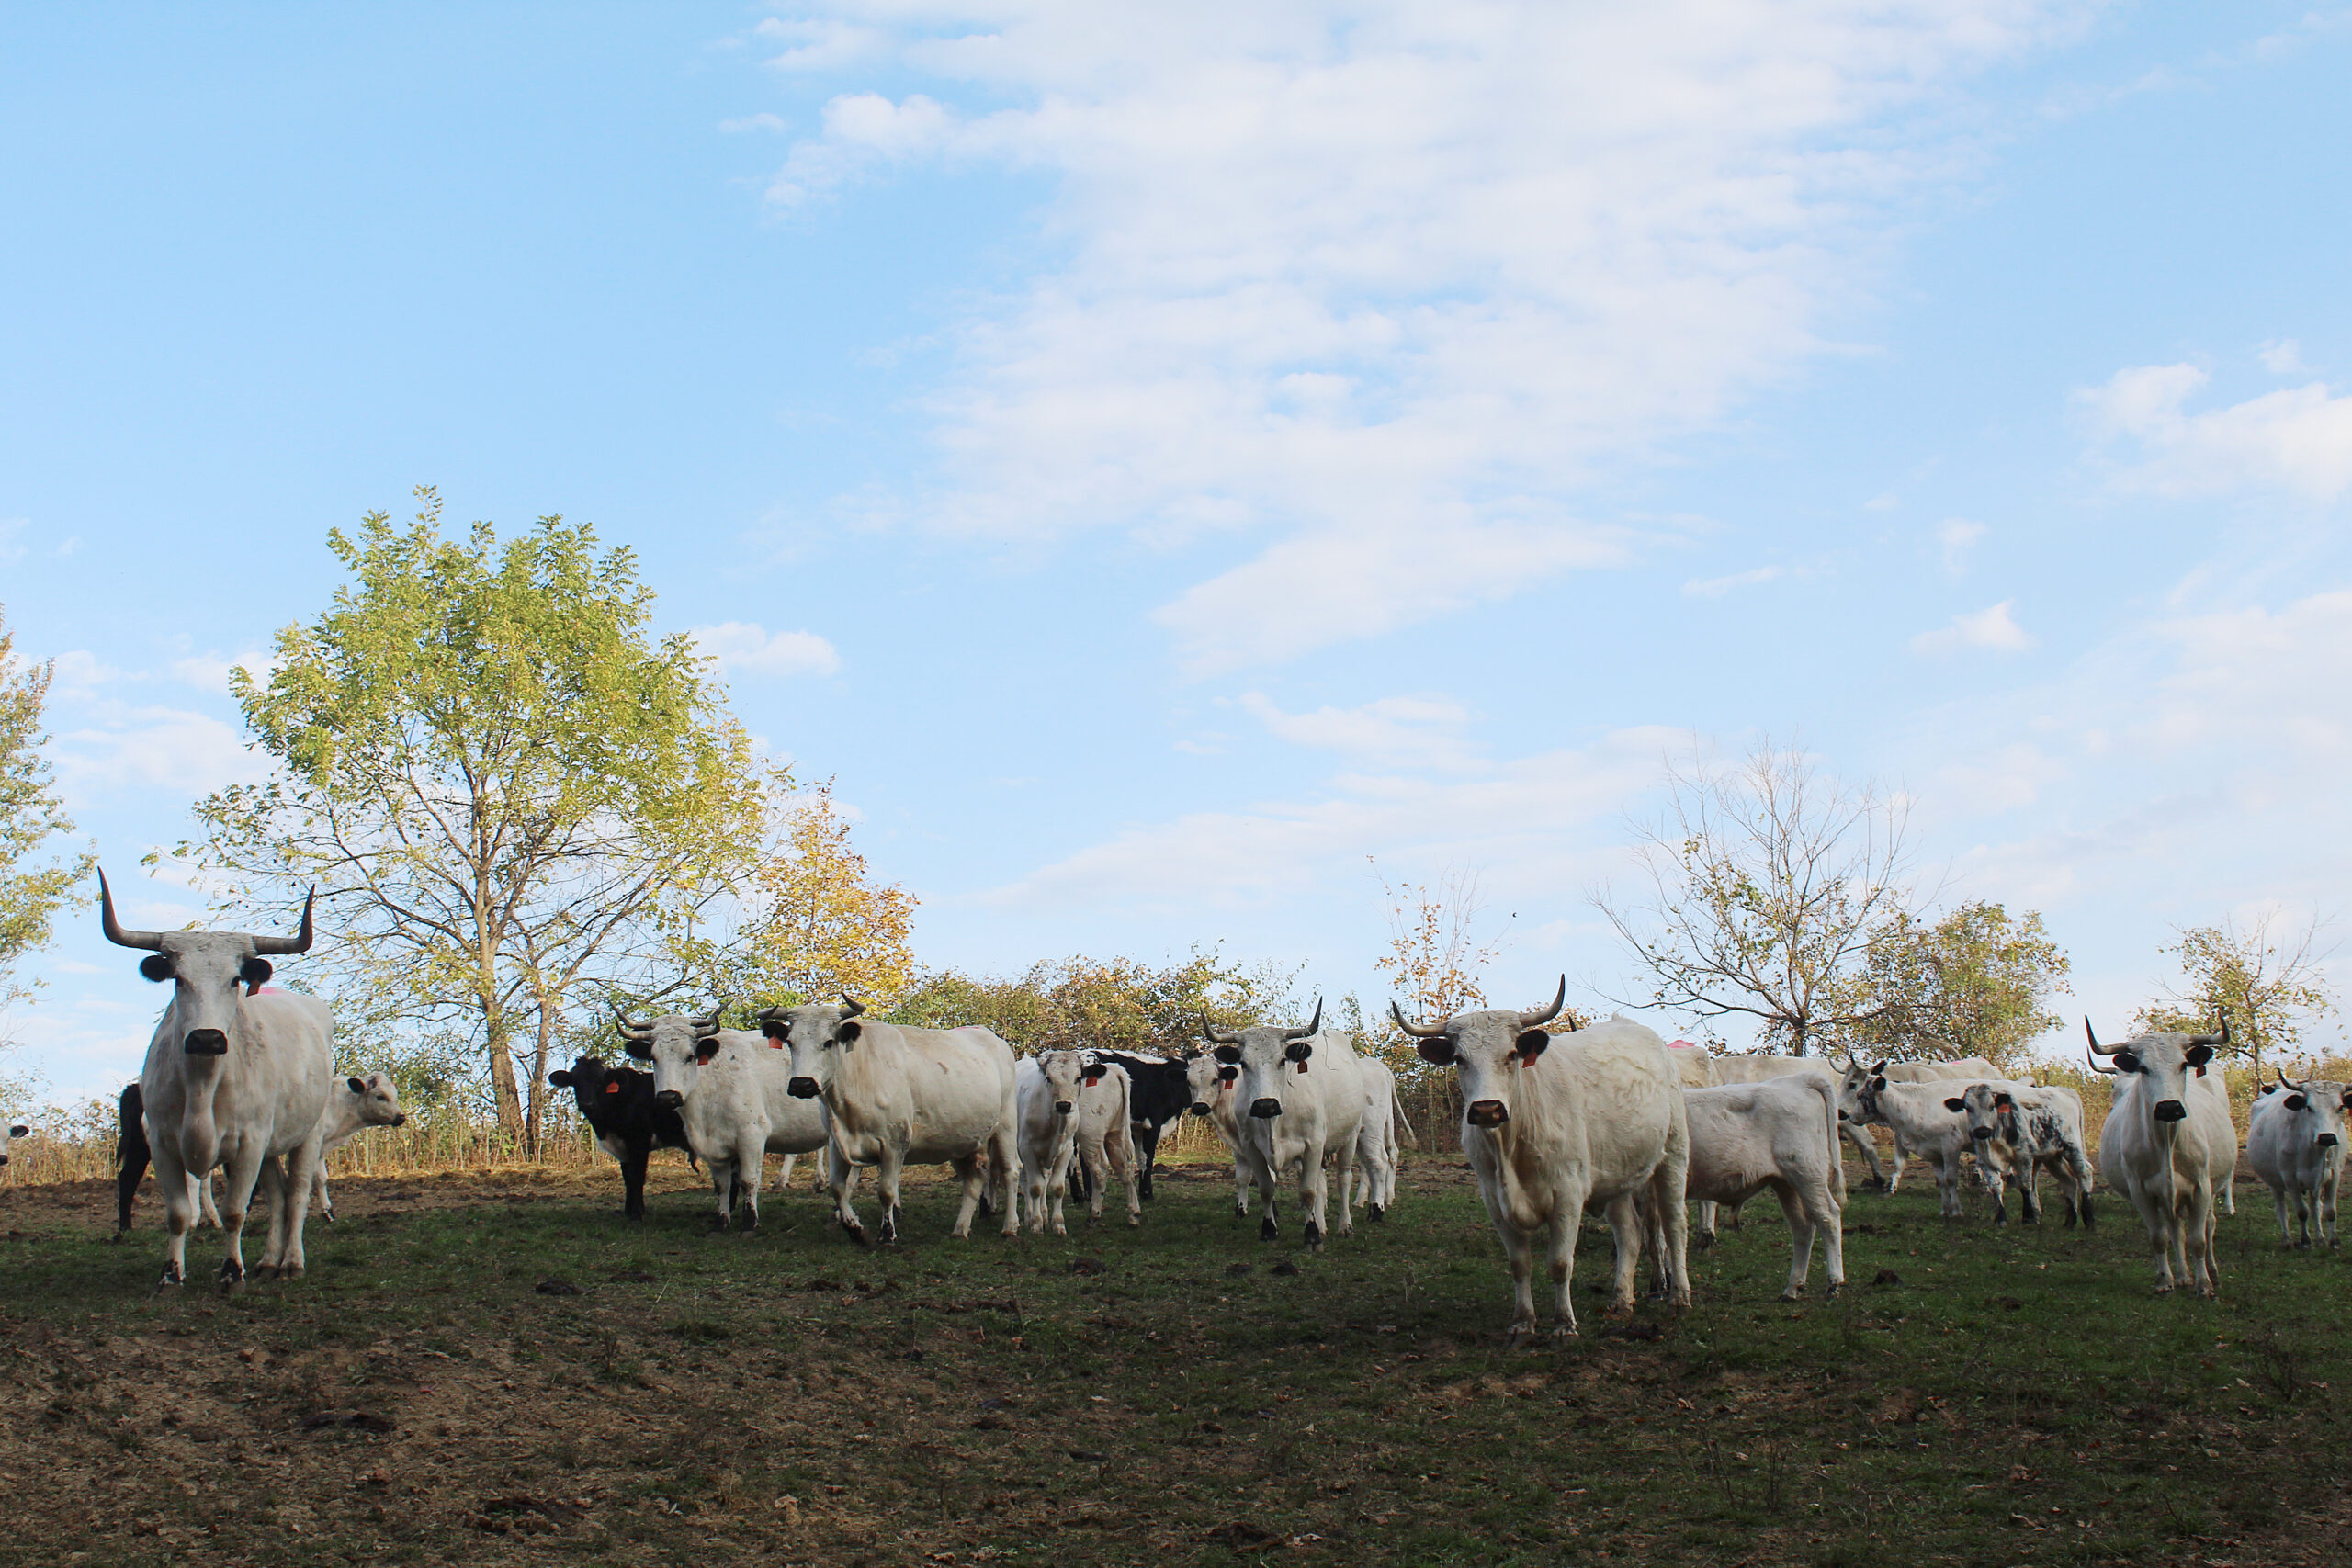 Many white and some black cattle stand in a field